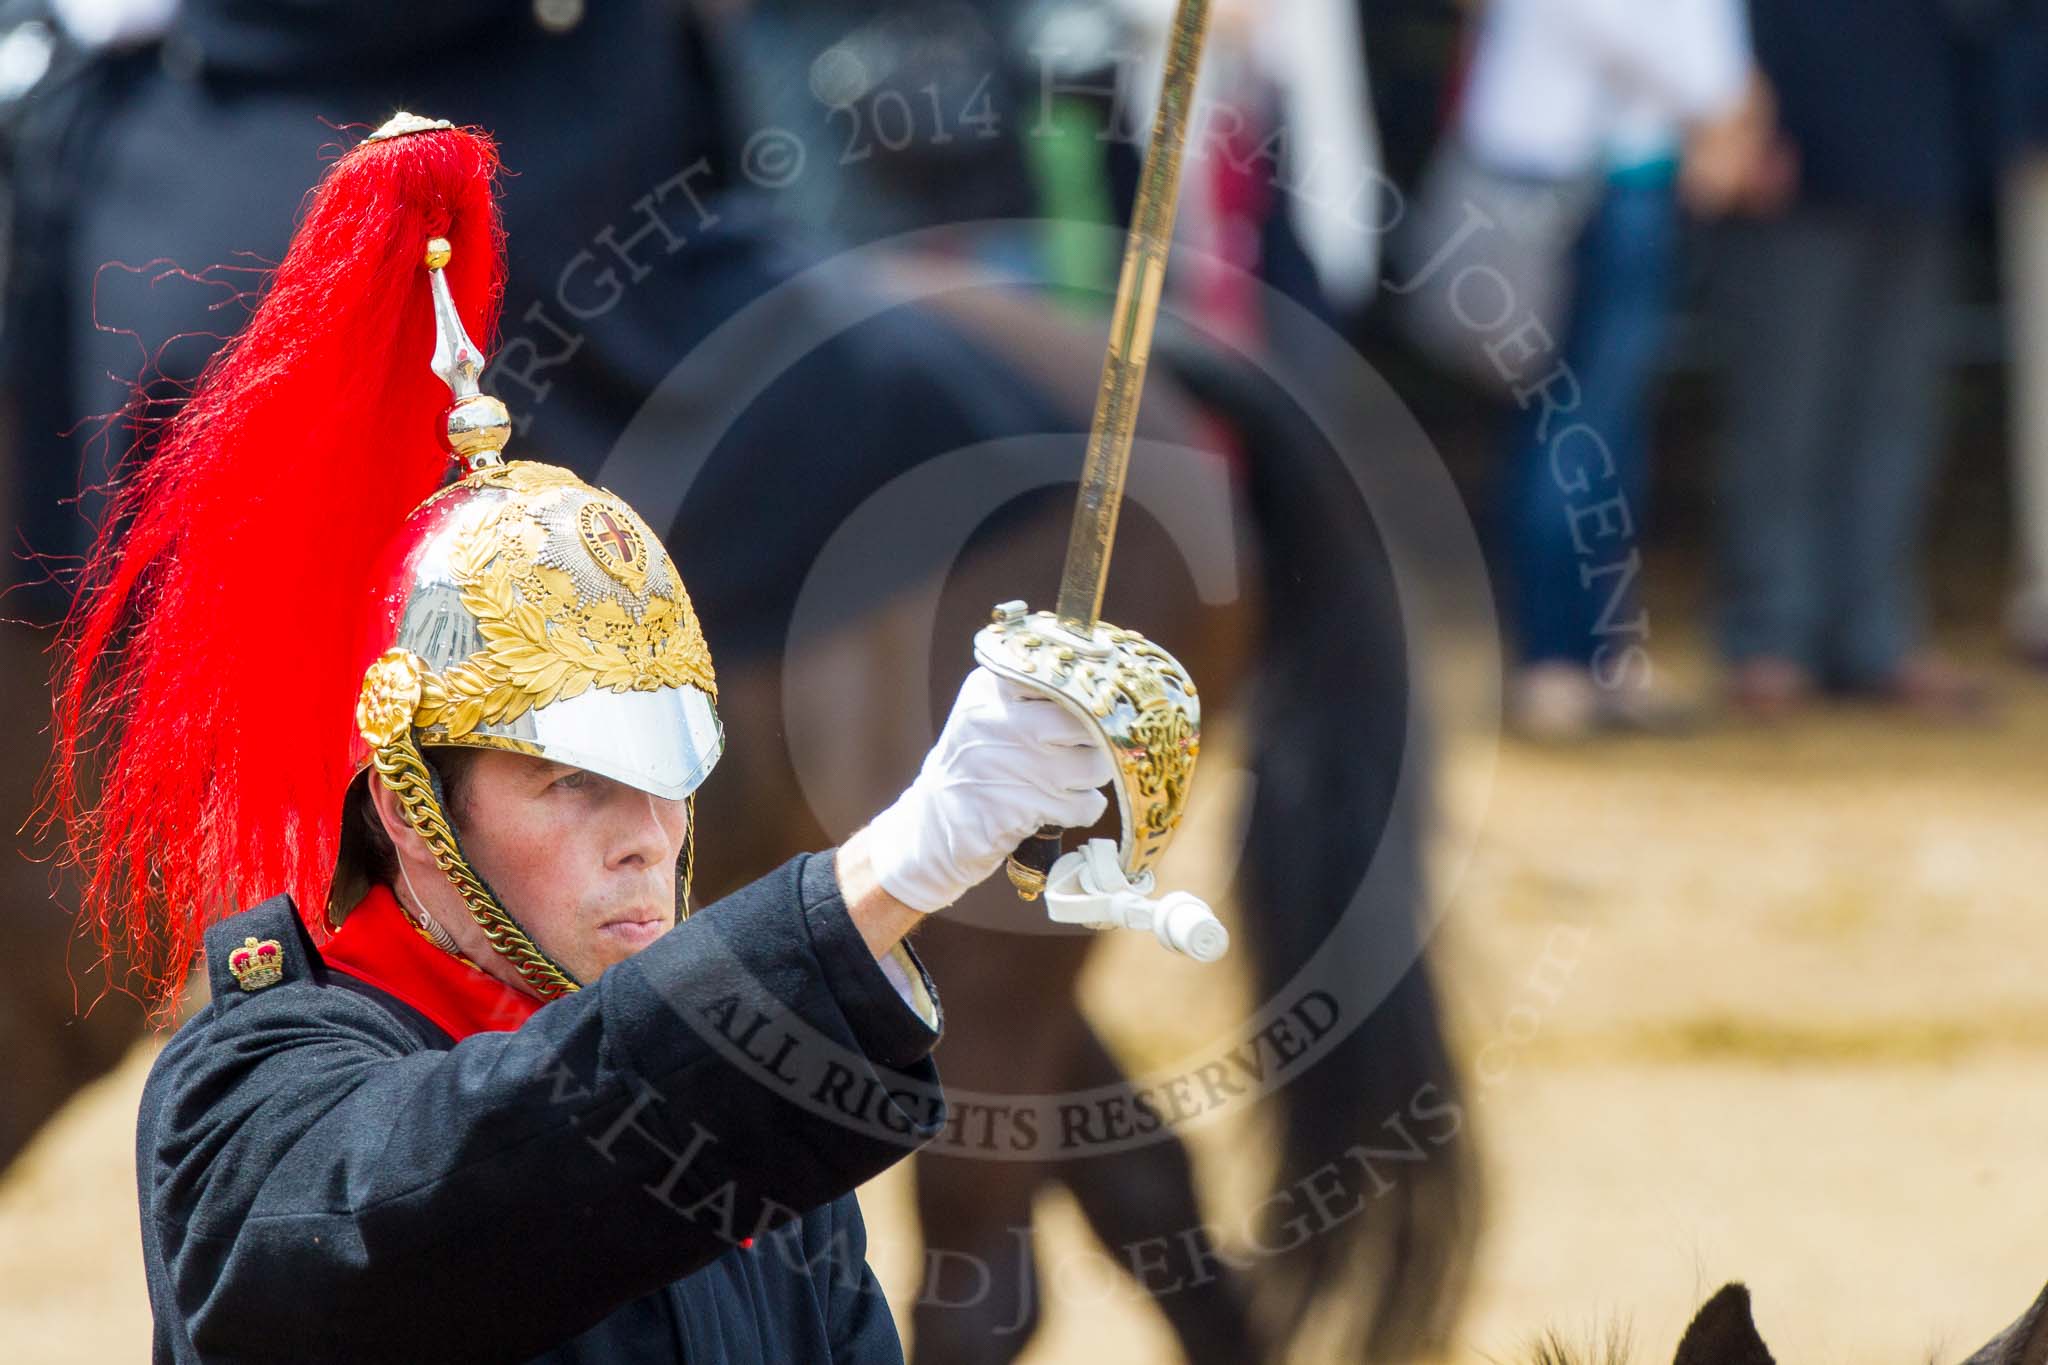 The Colonel's Review 2014.
Horse Guards Parade, Westminster,
London,

United Kingdom,
on 07 June 2014 at 11:58, image #673